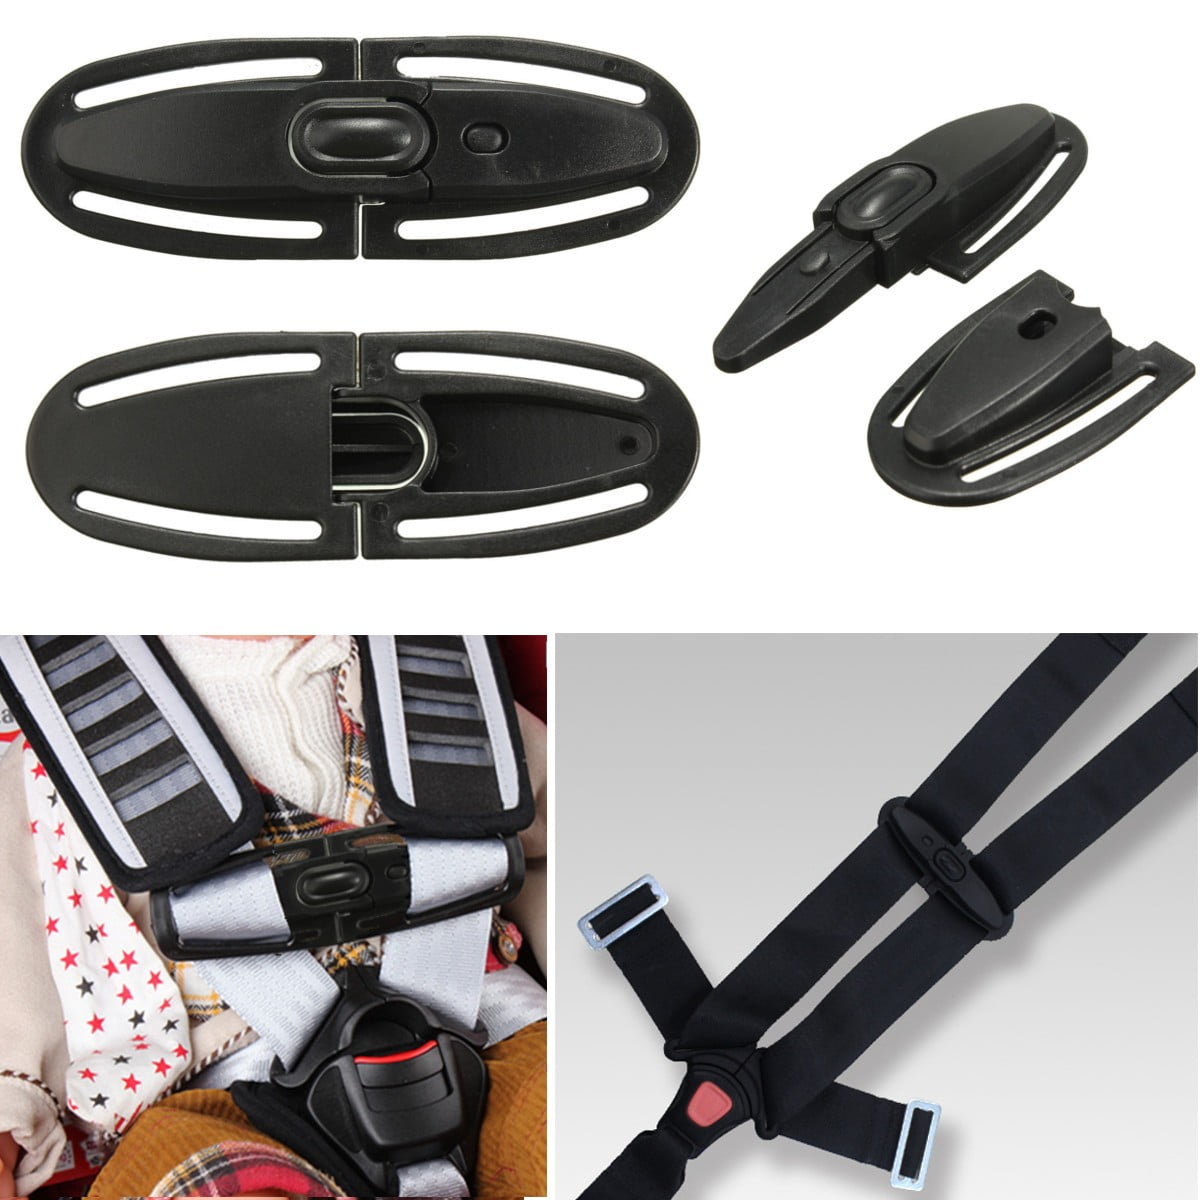 Xgood 3 Pack Baby Chest Harness Clip 3 Pack Car Seat Strap Safety Belt Clip Prevent Undo Belt Buckle for Baby Kid Safe Black,Red 